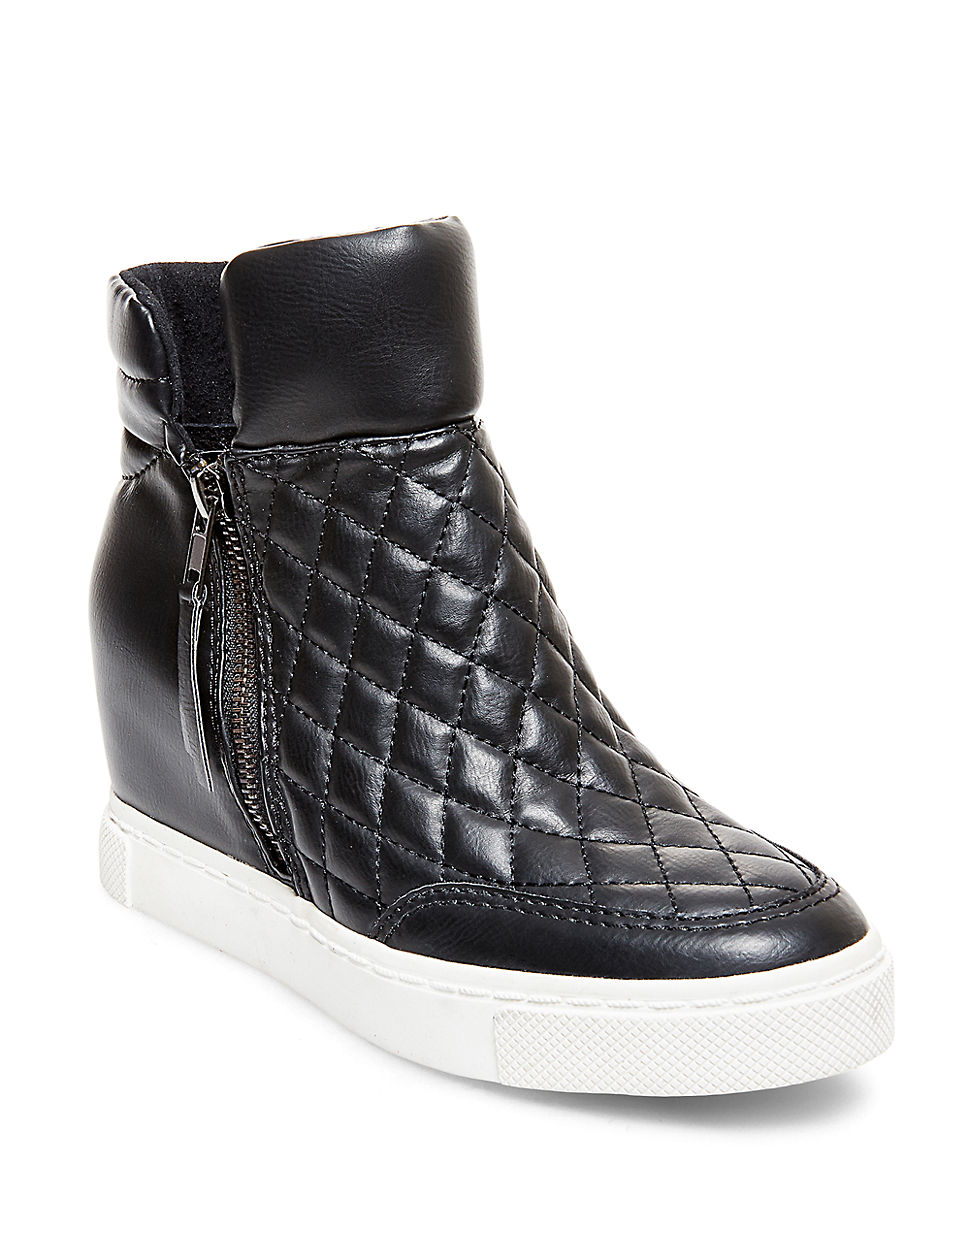 Steve madden Linqs Quilted Leatherette High-top Sneakers in Black | Lyst